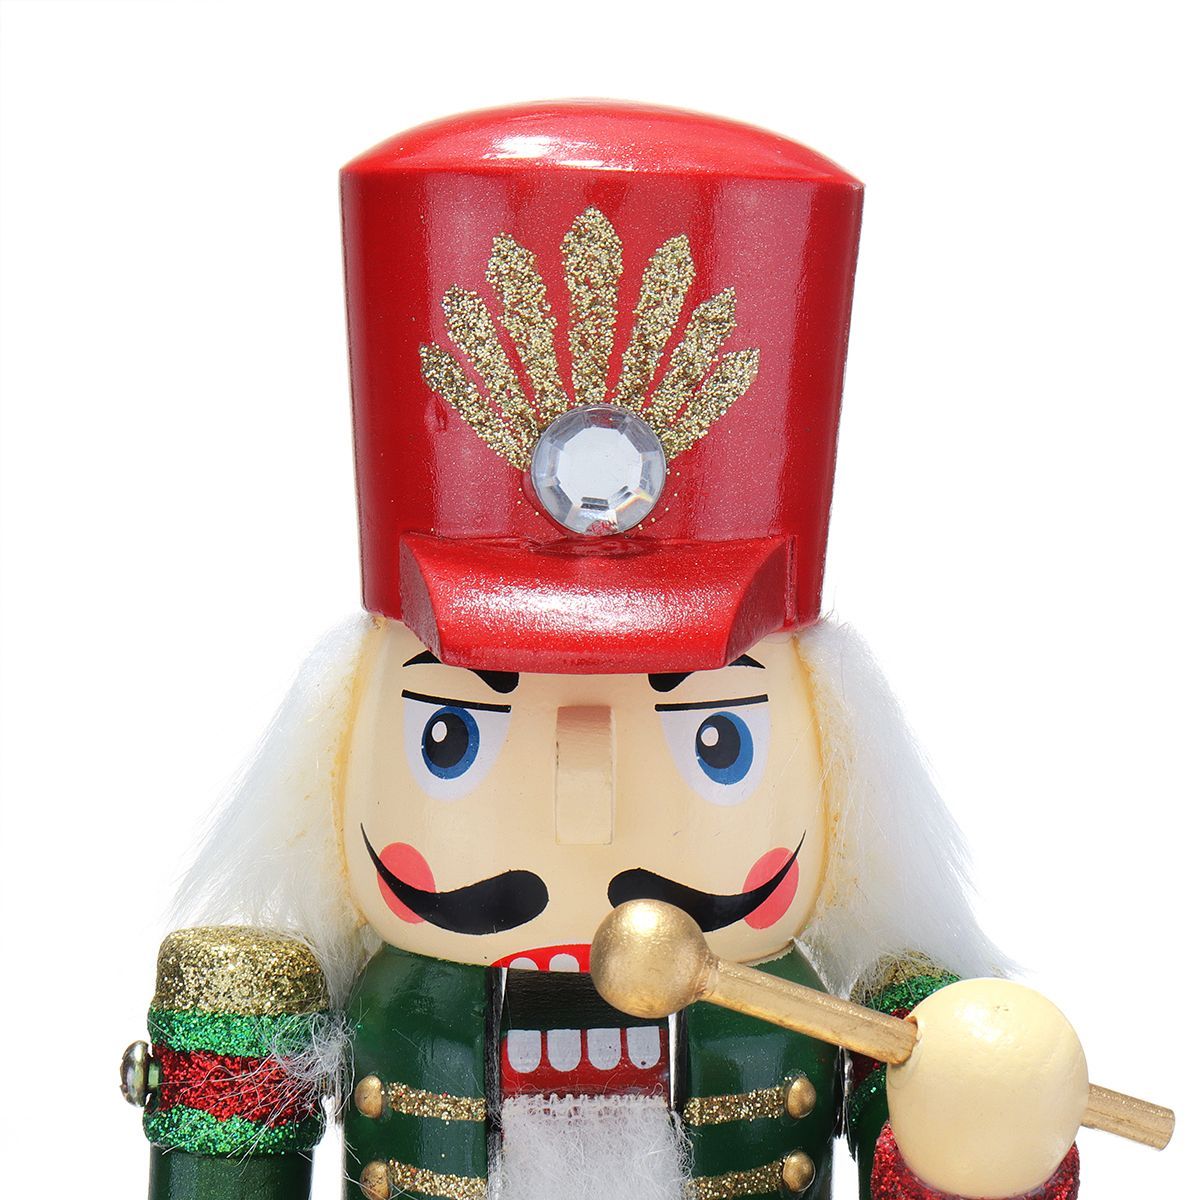 32CM-Wooden-Guard-Nutcracker-Soldier-Toy-Music-Box-Christmas-Decorations-Xmas-Gift-1605612